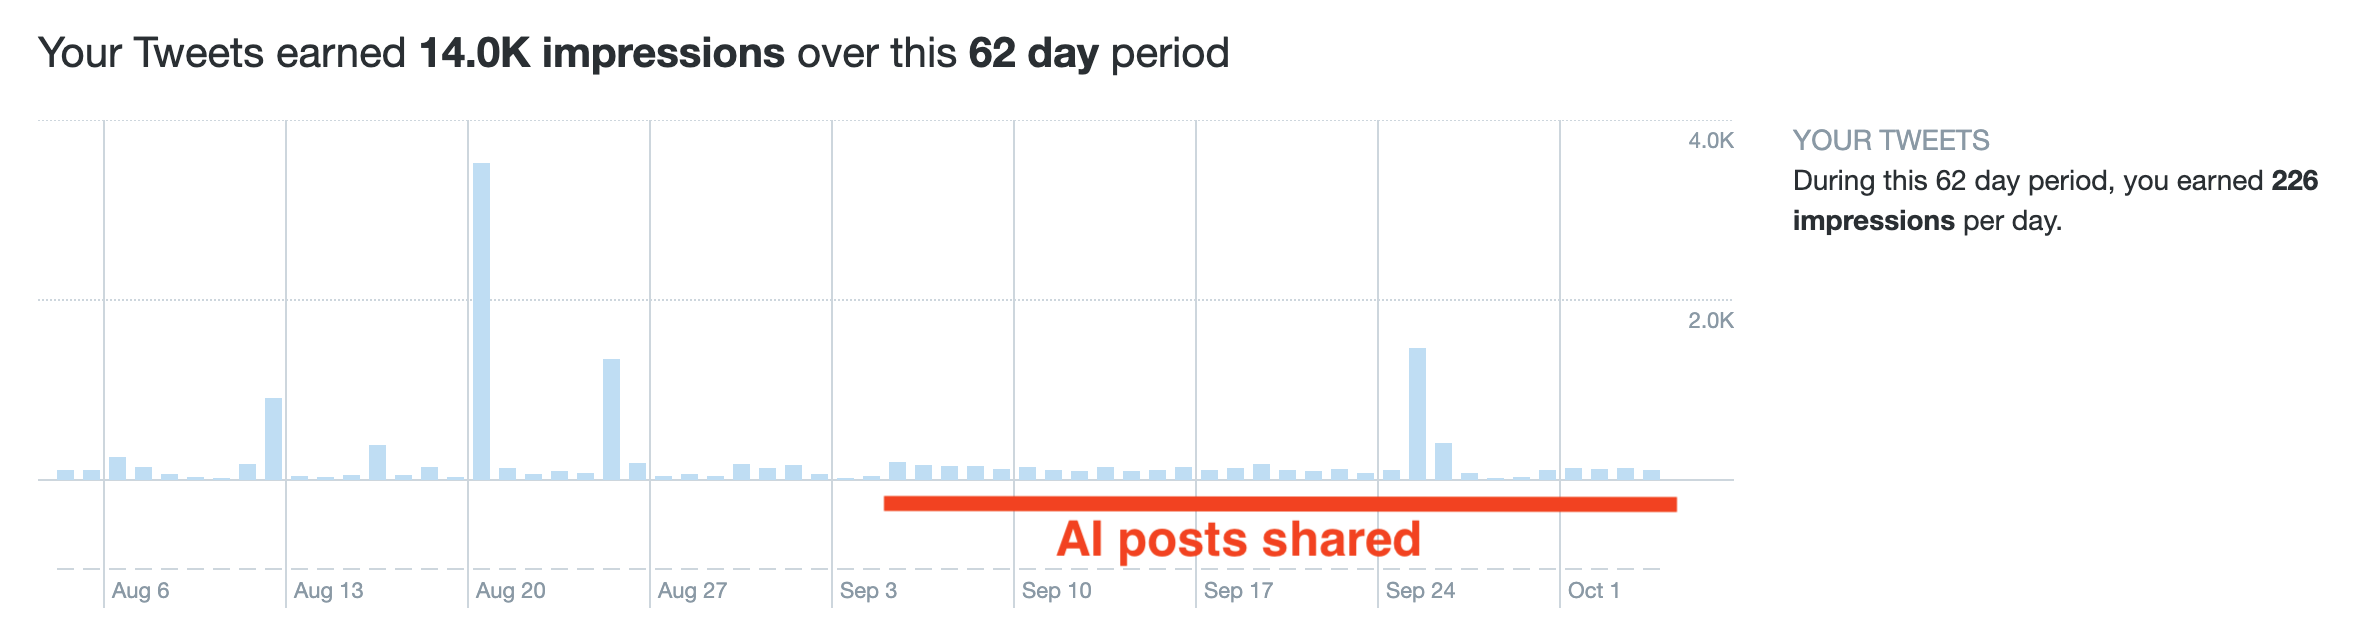 The effect of AI posts on social media reach